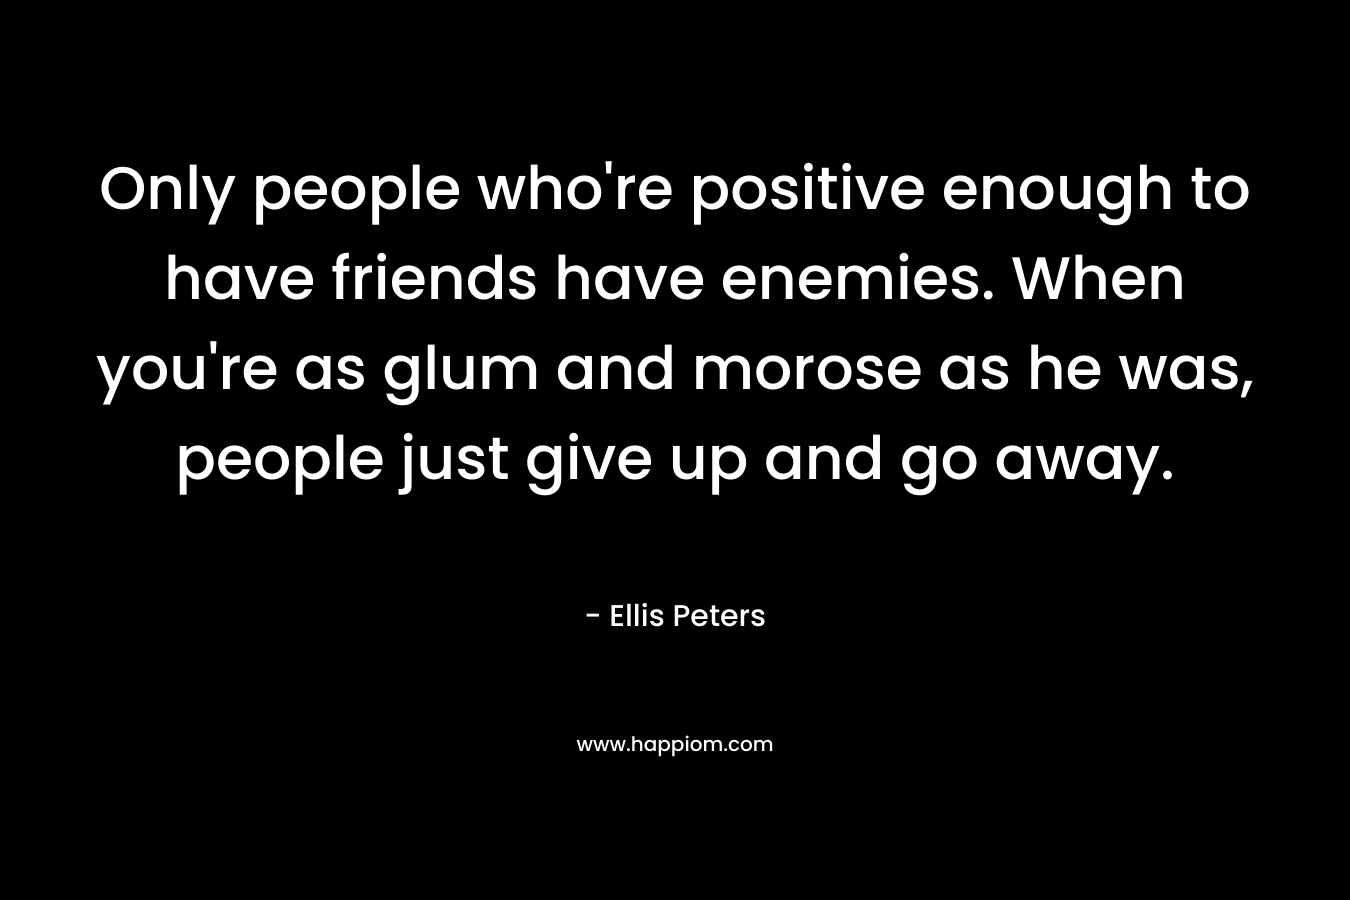 Only people who’re positive enough to have friends have enemies. When you’re as glum and morose as he was, people just give up and go away. – Ellis Peters